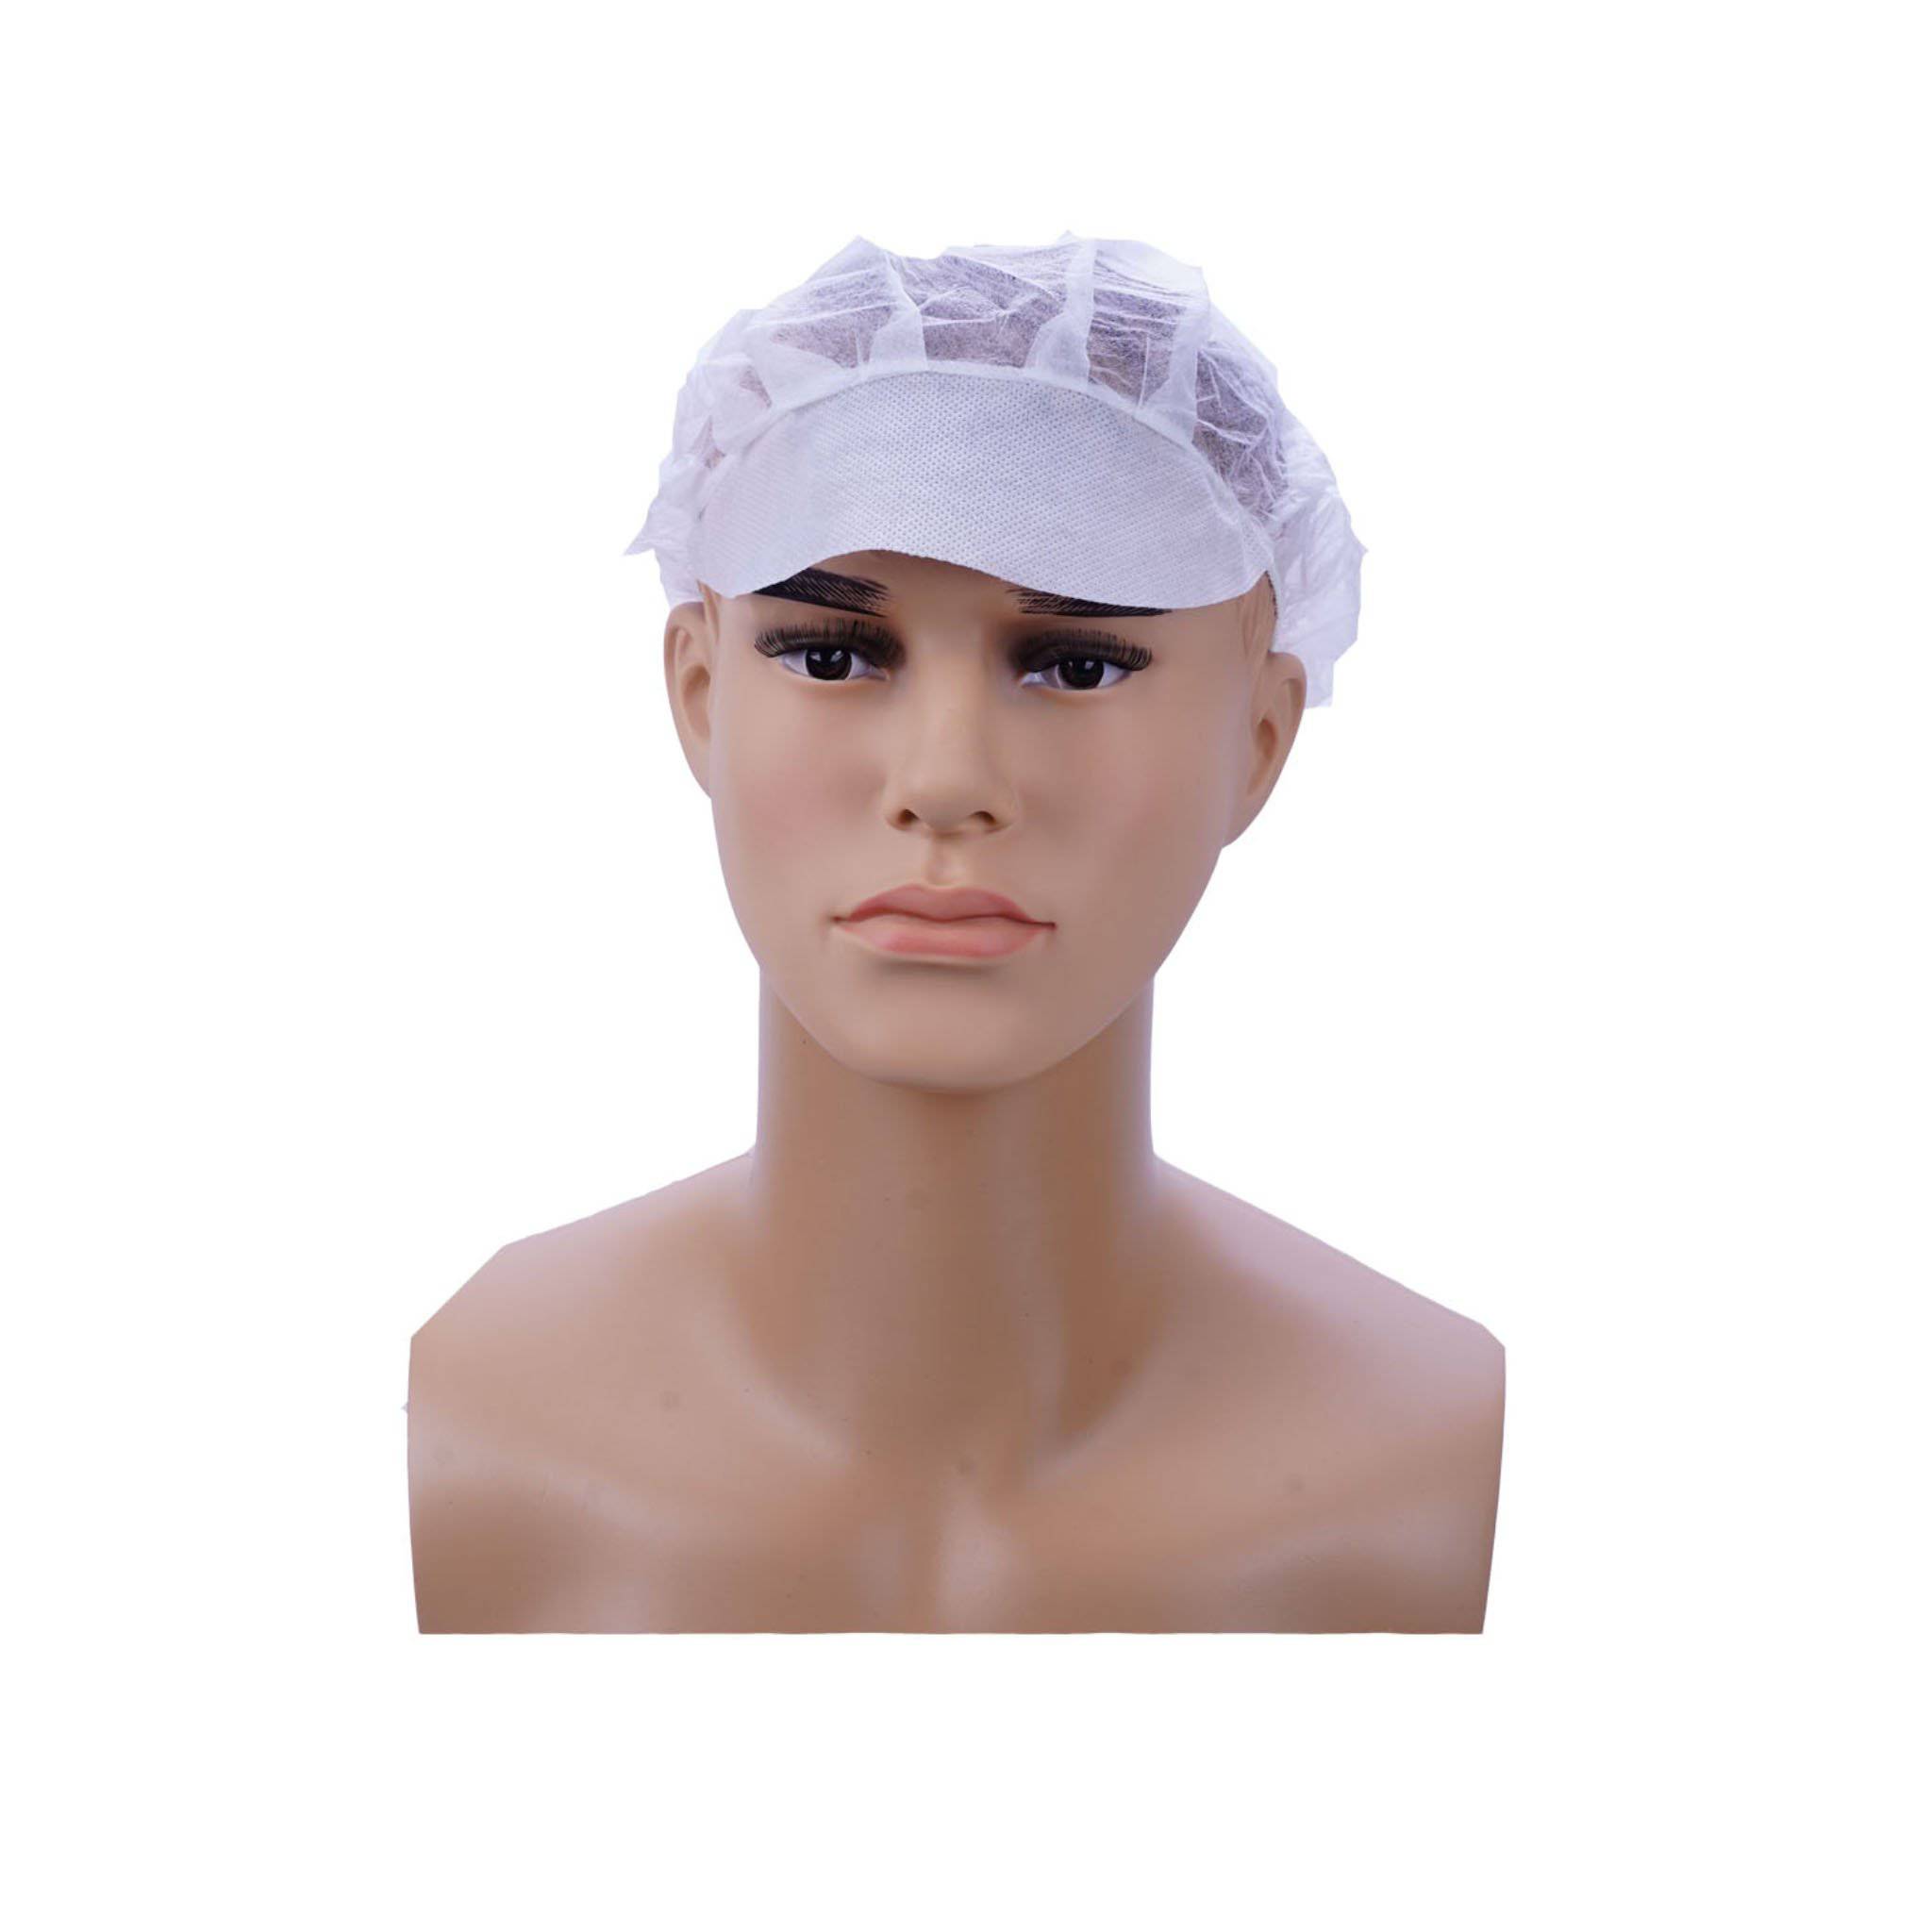 Hotpack | Non Woven Peaked Cap White | 100 Pieces X 10 Packts - Hotpack Global